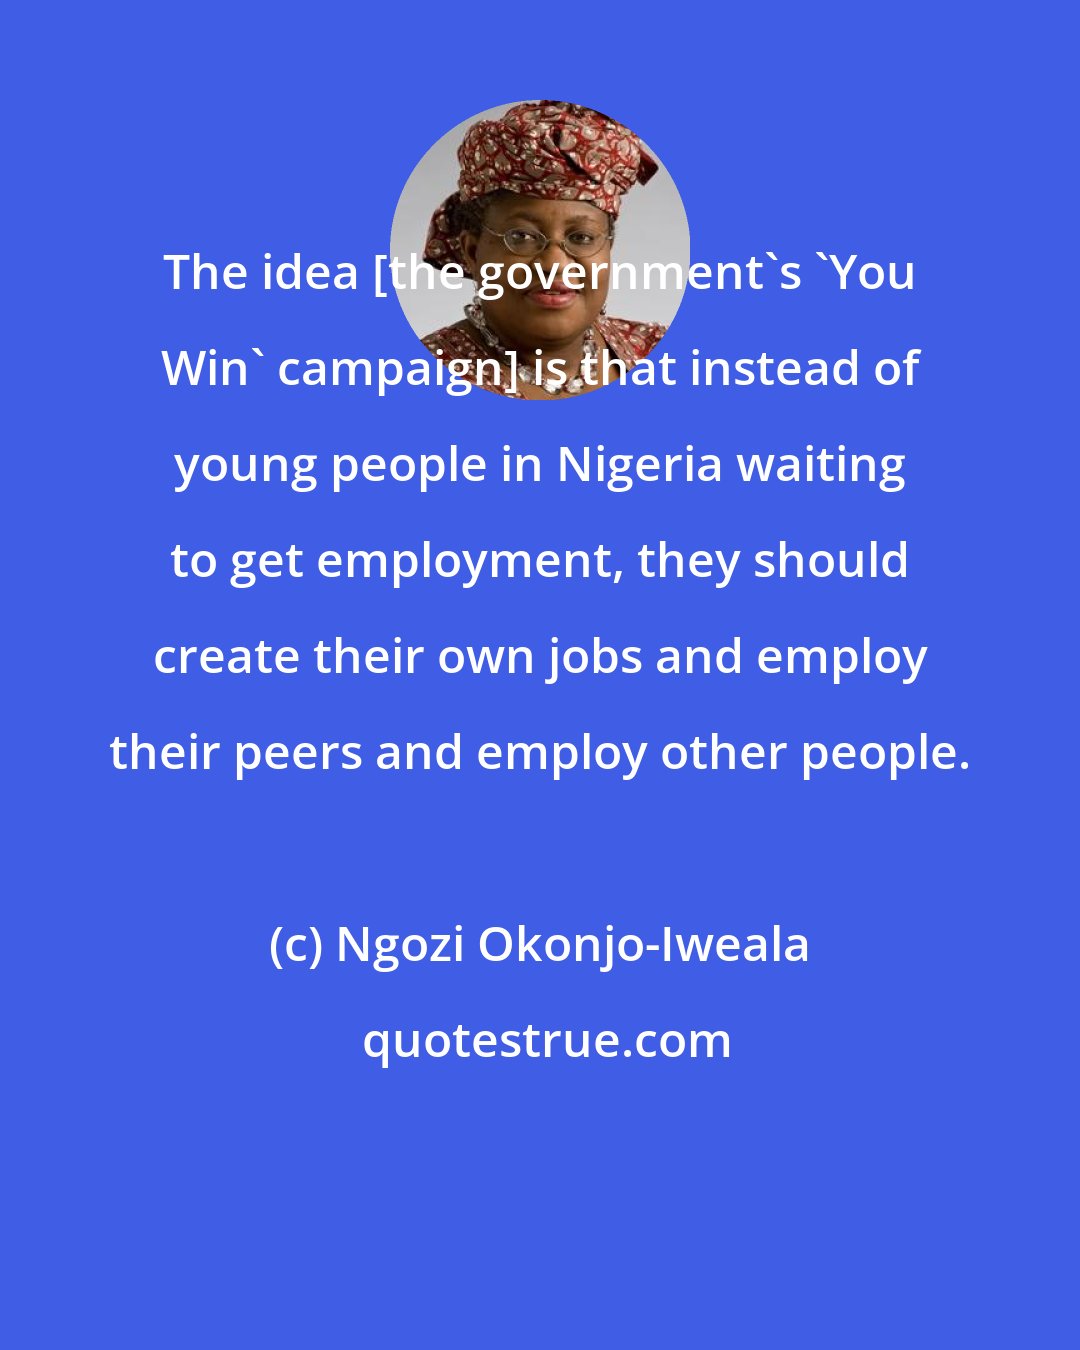 Ngozi Okonjo-Iweala: The idea [the government's 'You Win' campaign] is that instead of young people in Nigeria waiting to get employment, they should create their own jobs and employ their peers and employ other people.